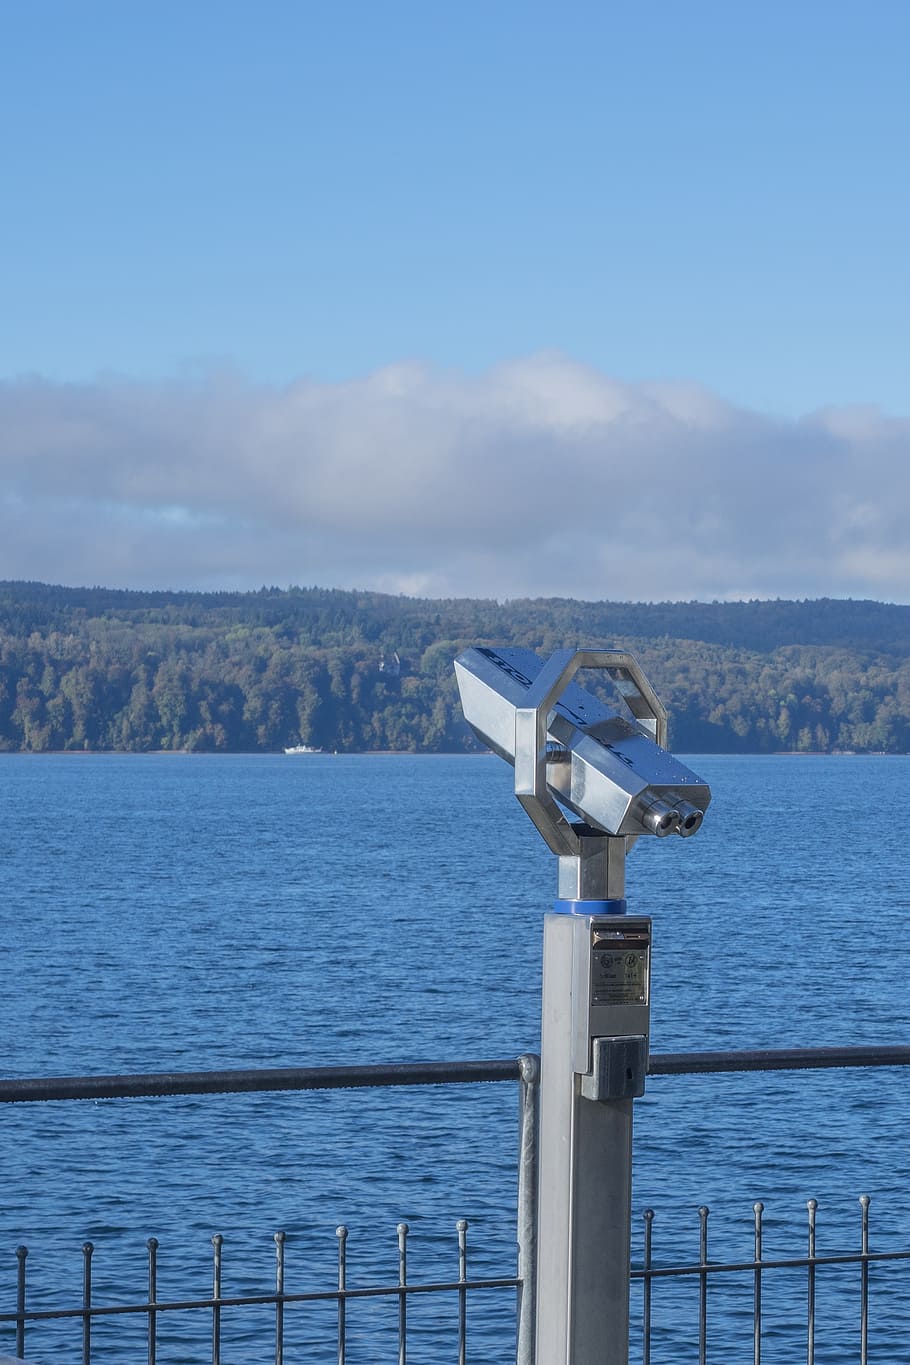 binoculars, lake constance, lake, view, telescope, distant, stainless steel, water, sky, coin operated